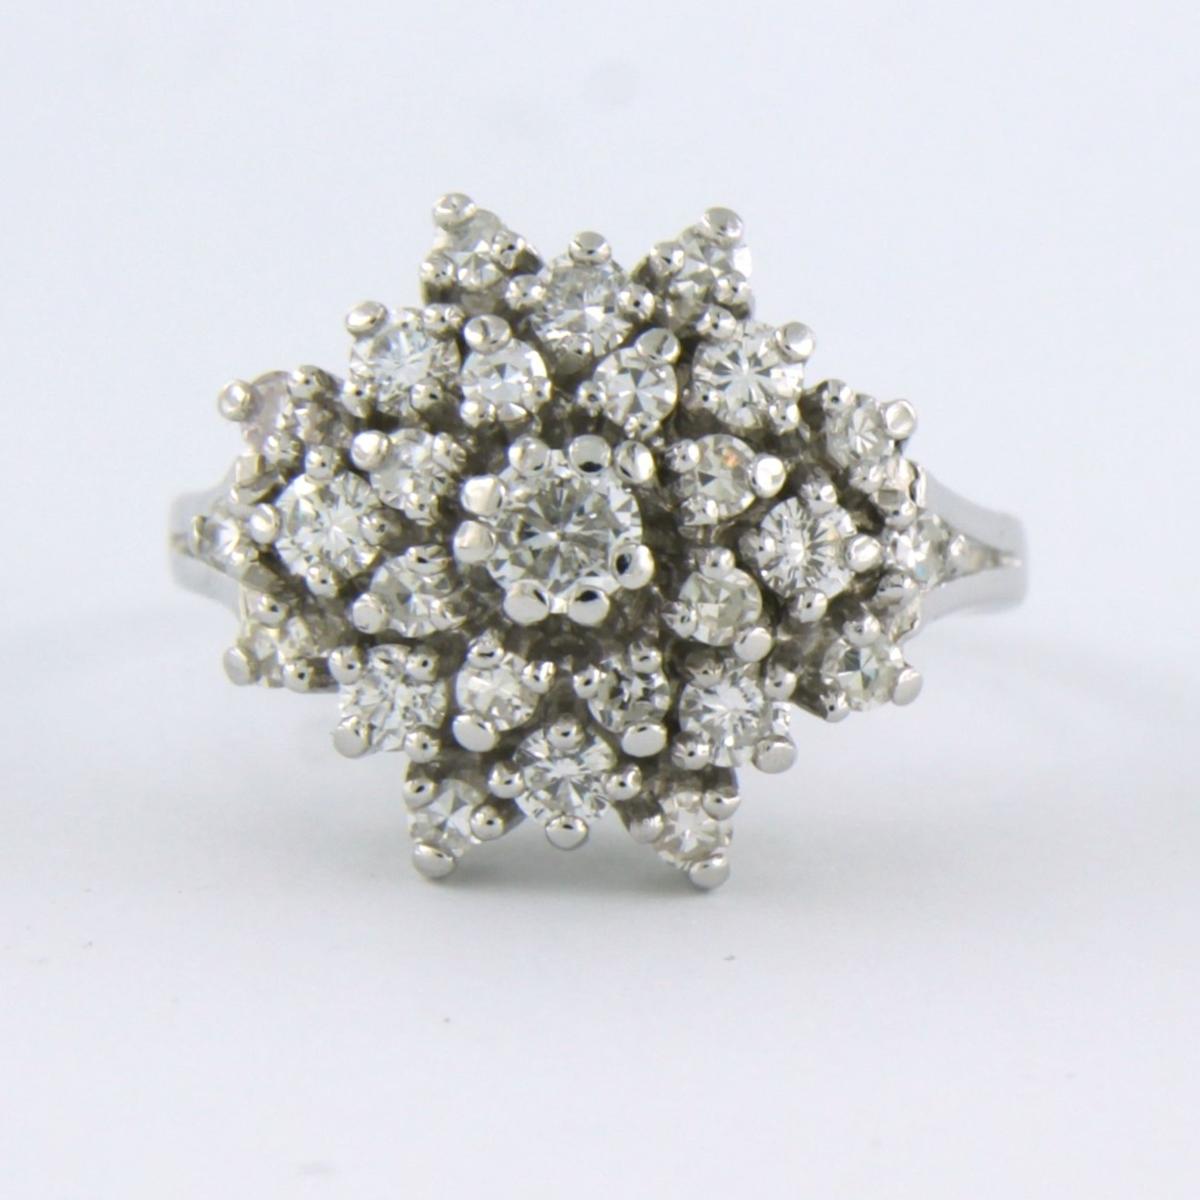 14k white gold cluster ring set with brilliant cut diamonds up to . 1.00ct - F/G - VS/SI - ring size U.S. 7 - EU. 17.25 (54)

detailed description

the top of the ring is 1.4 cm wide by 9.3 mm high

weight 4.5 grams

ring size US 7 - EU. 17.25 (54),